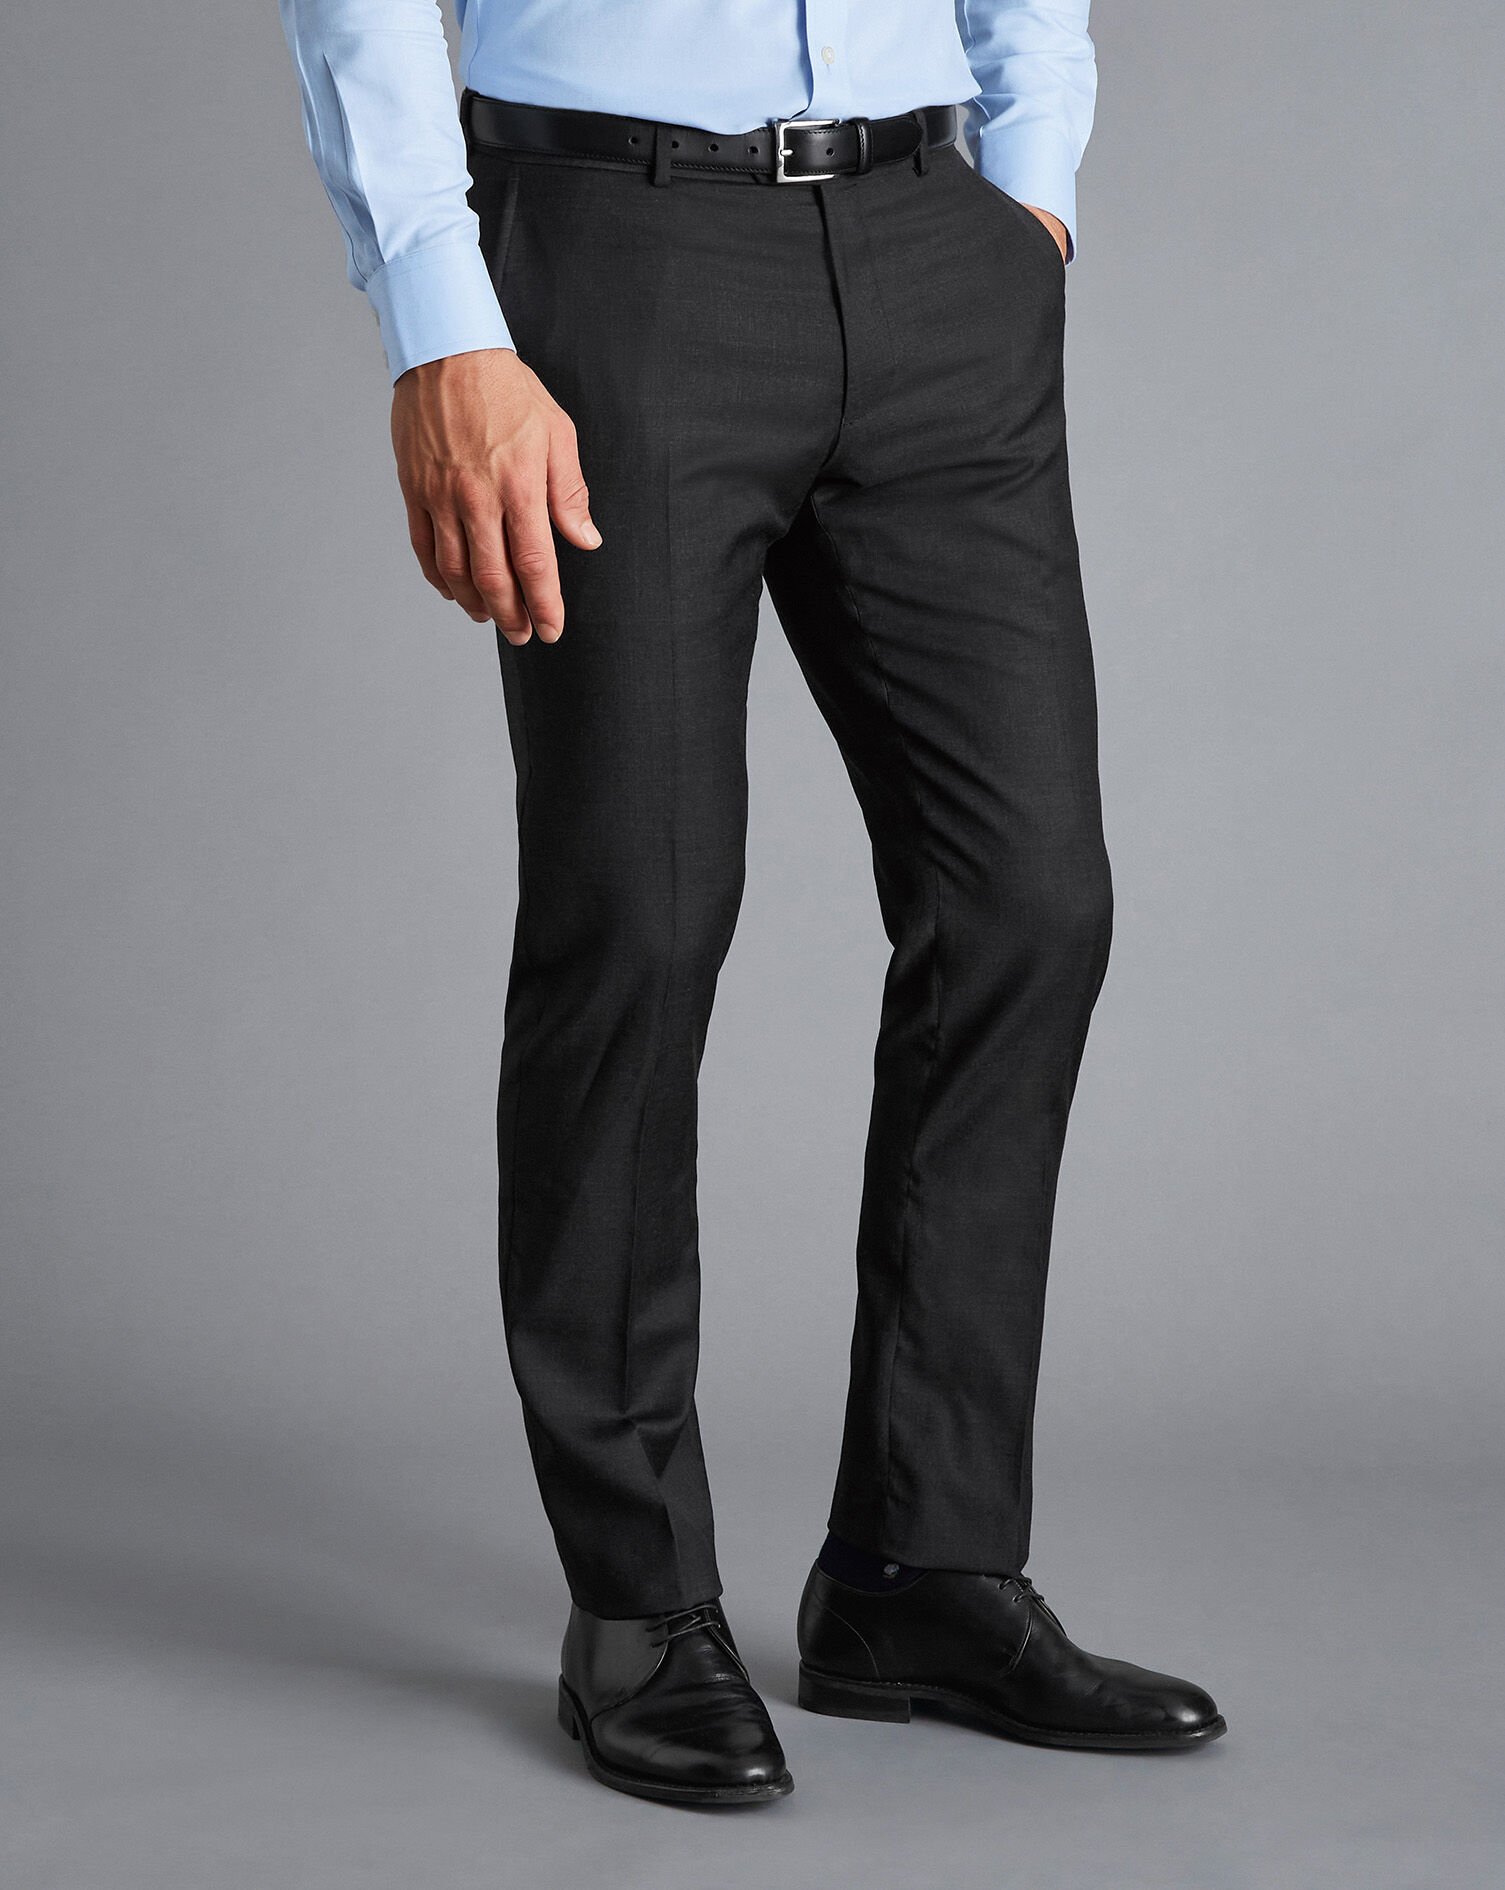 How To Wear A T-Shirt With Dress Pants (Essential Tips) • Ready Sleek